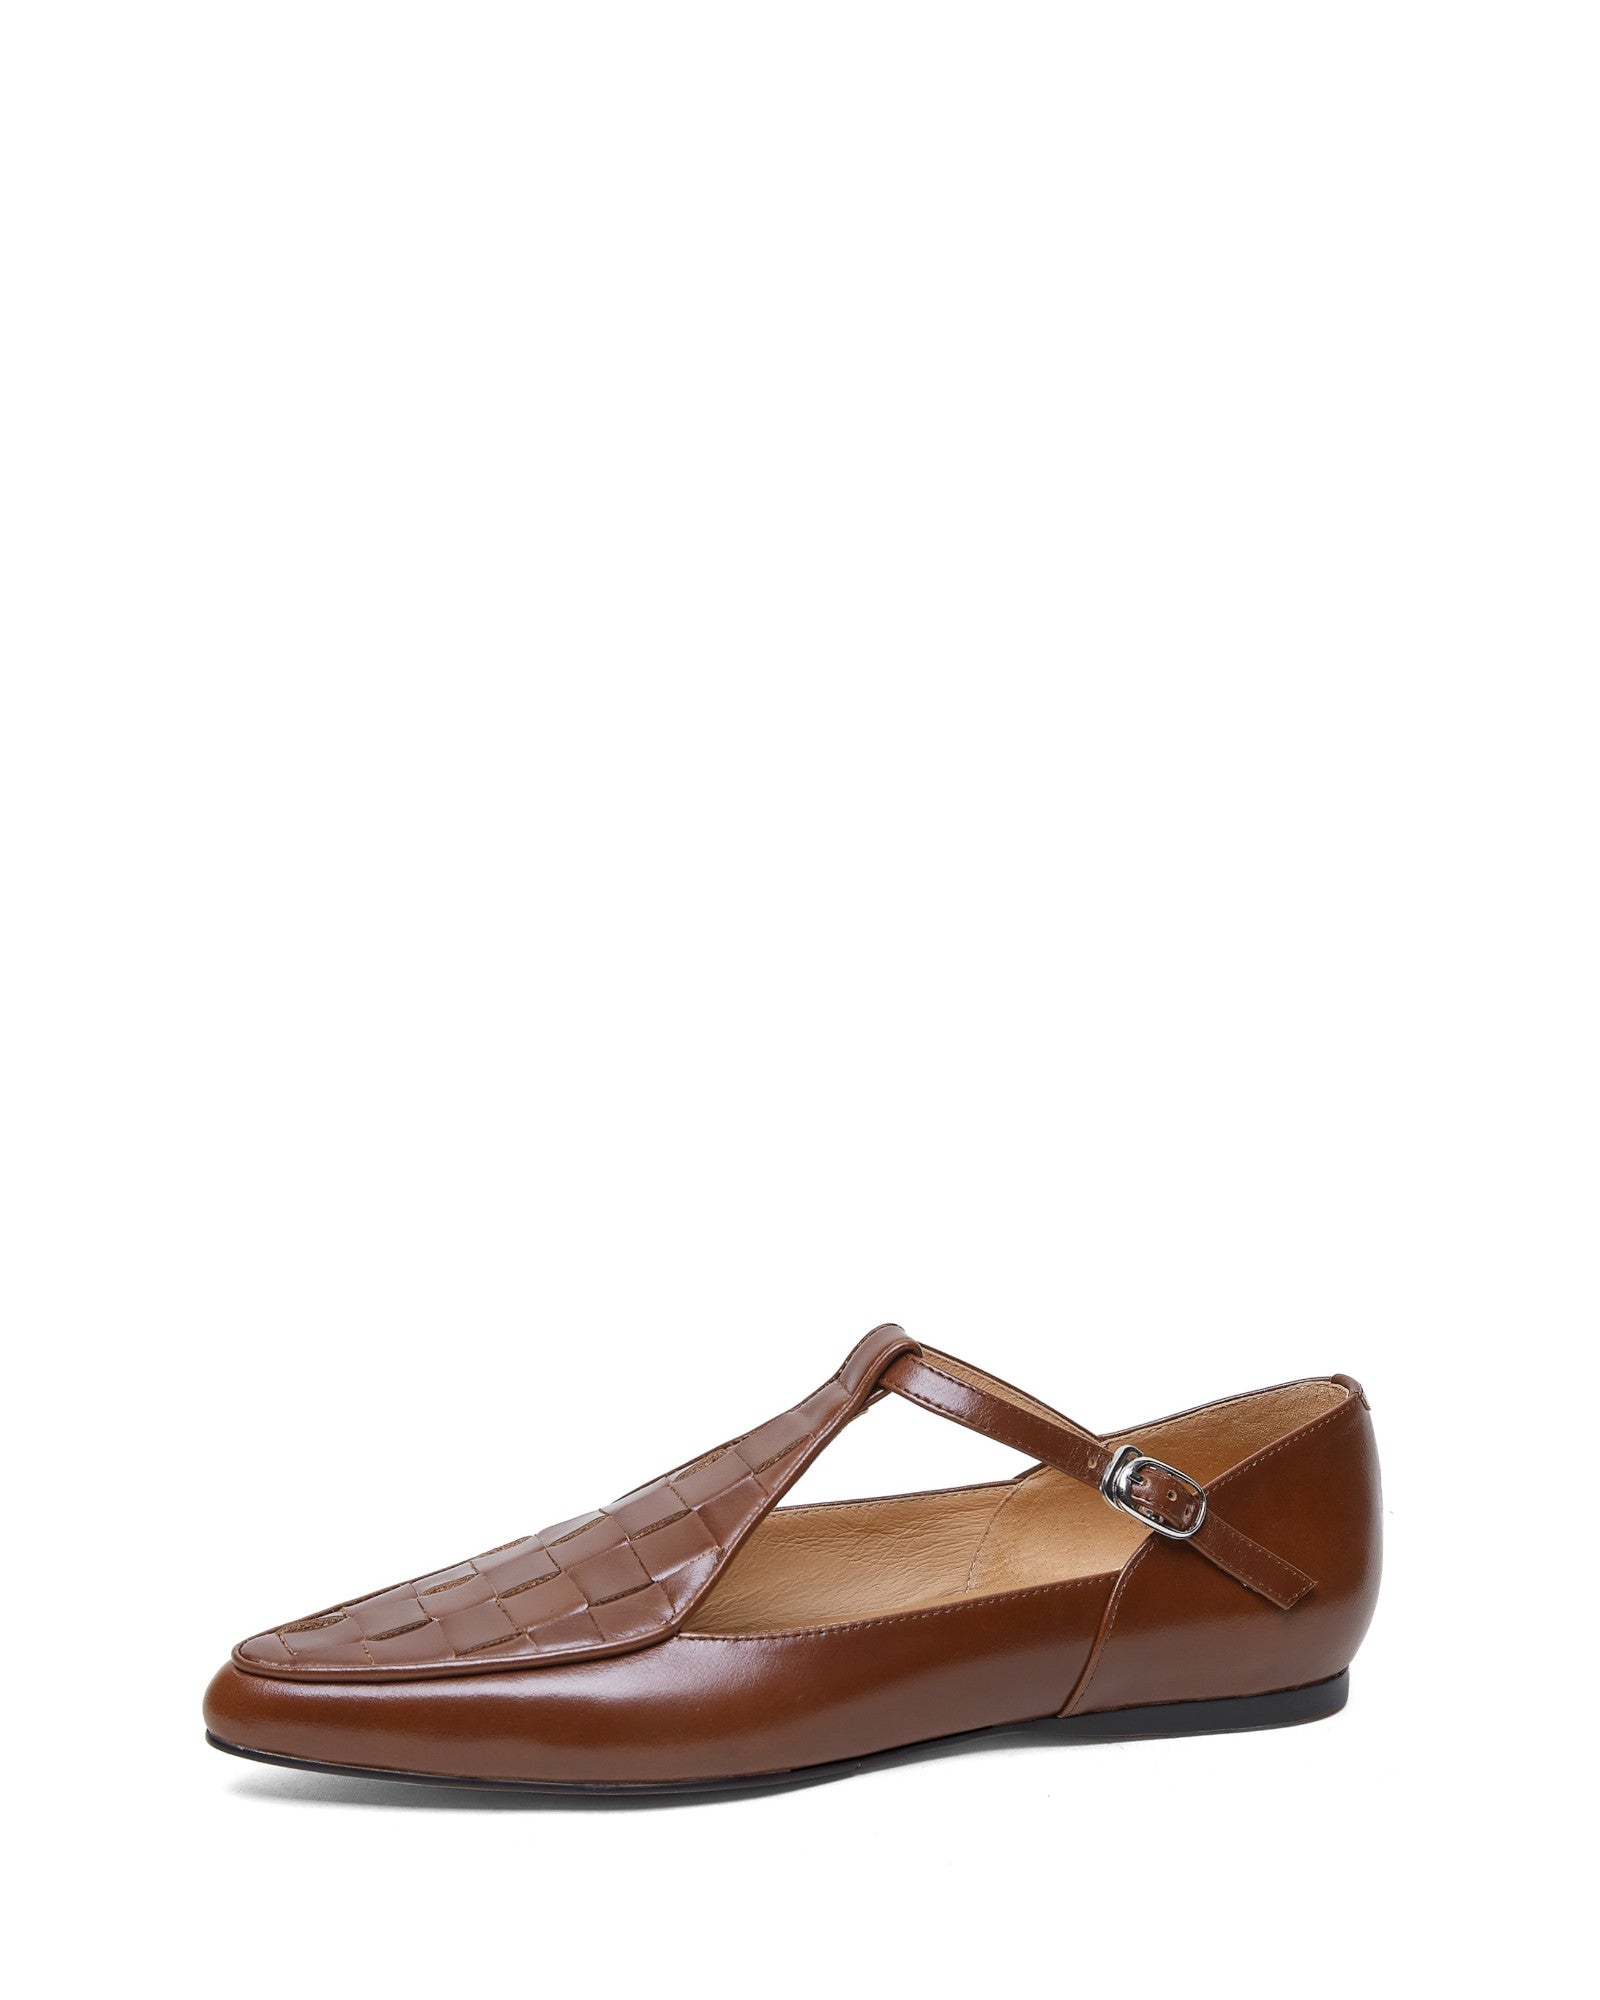 Mons-T-Strap-Woven-Leather-Loafers-Brown